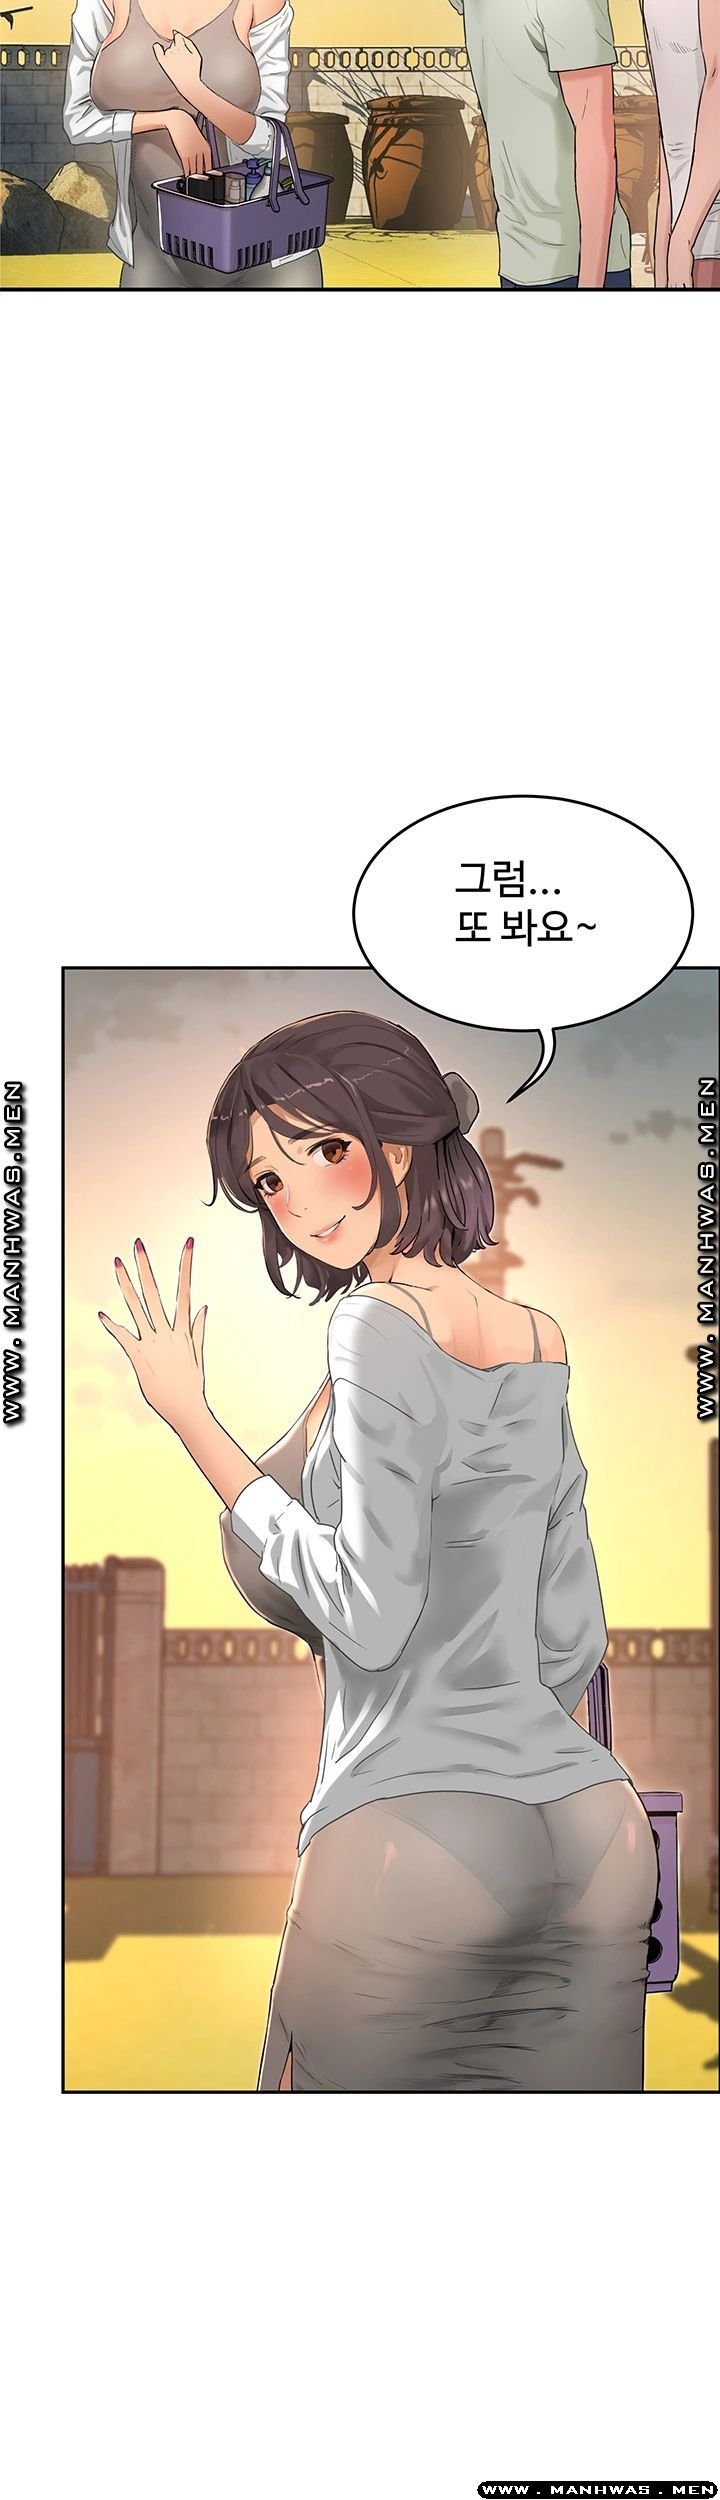 in-the-summer-raw-chap-3-16